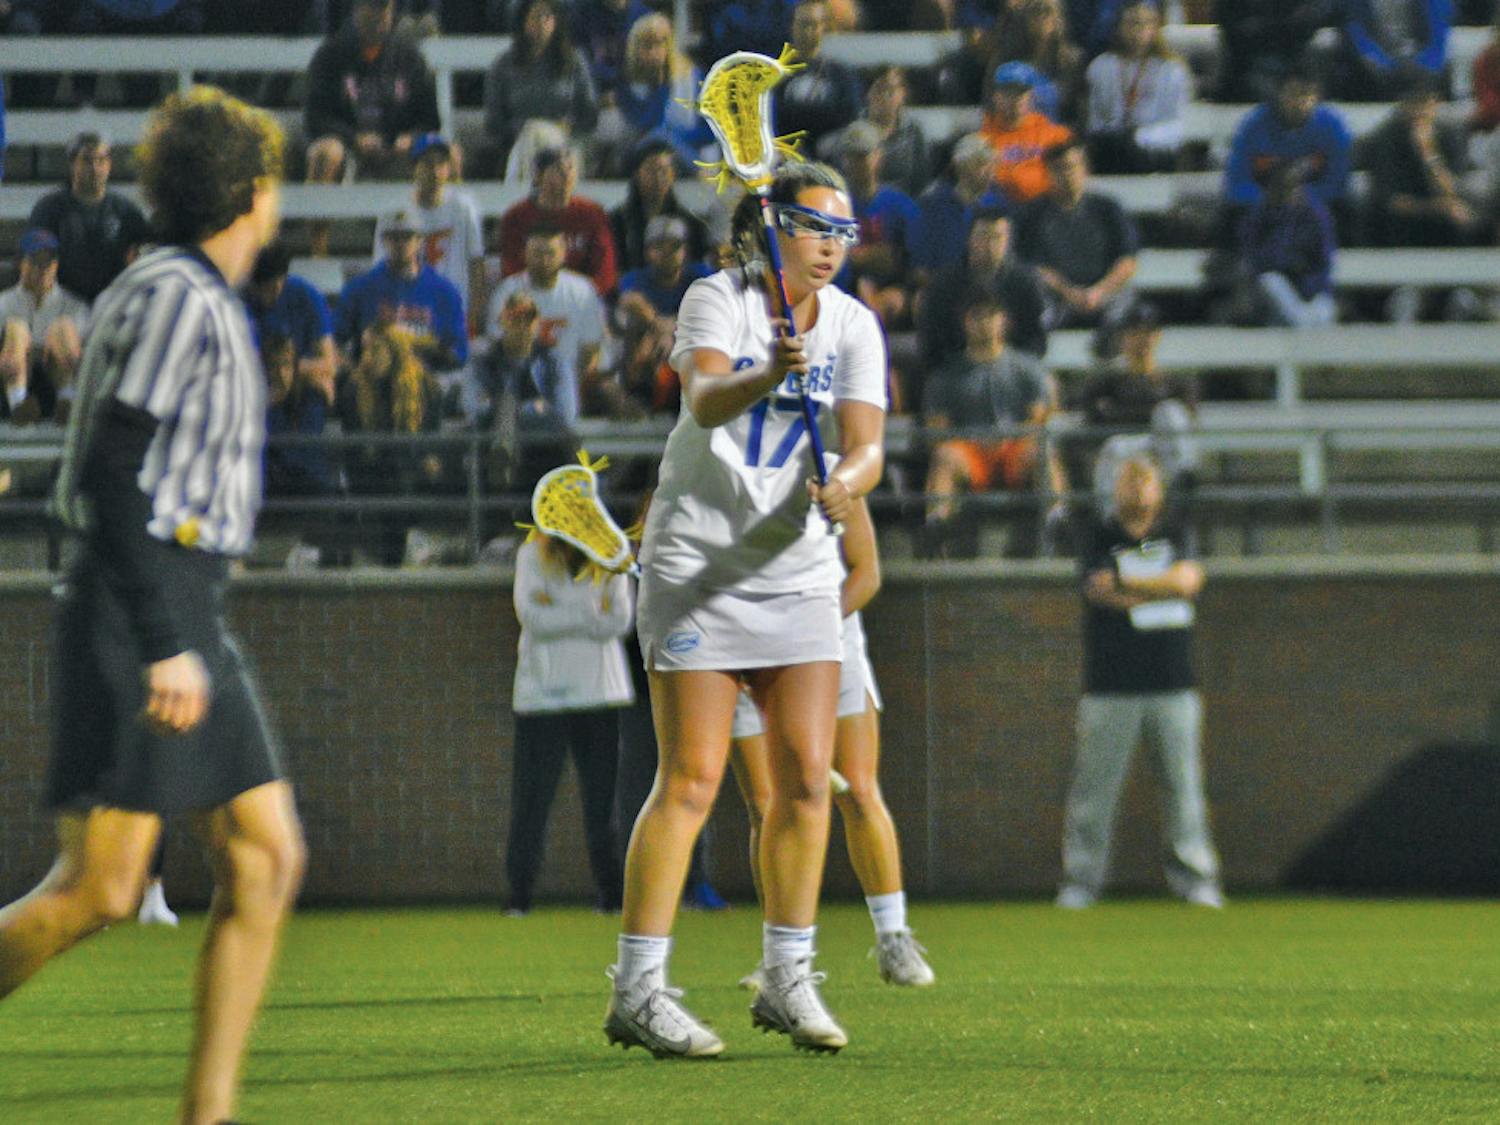 Midfielder Shannon Kavanagh recorded a career-high eight points and 13 draw controls in Florida's 16-5 win over UConn on Saturday. 